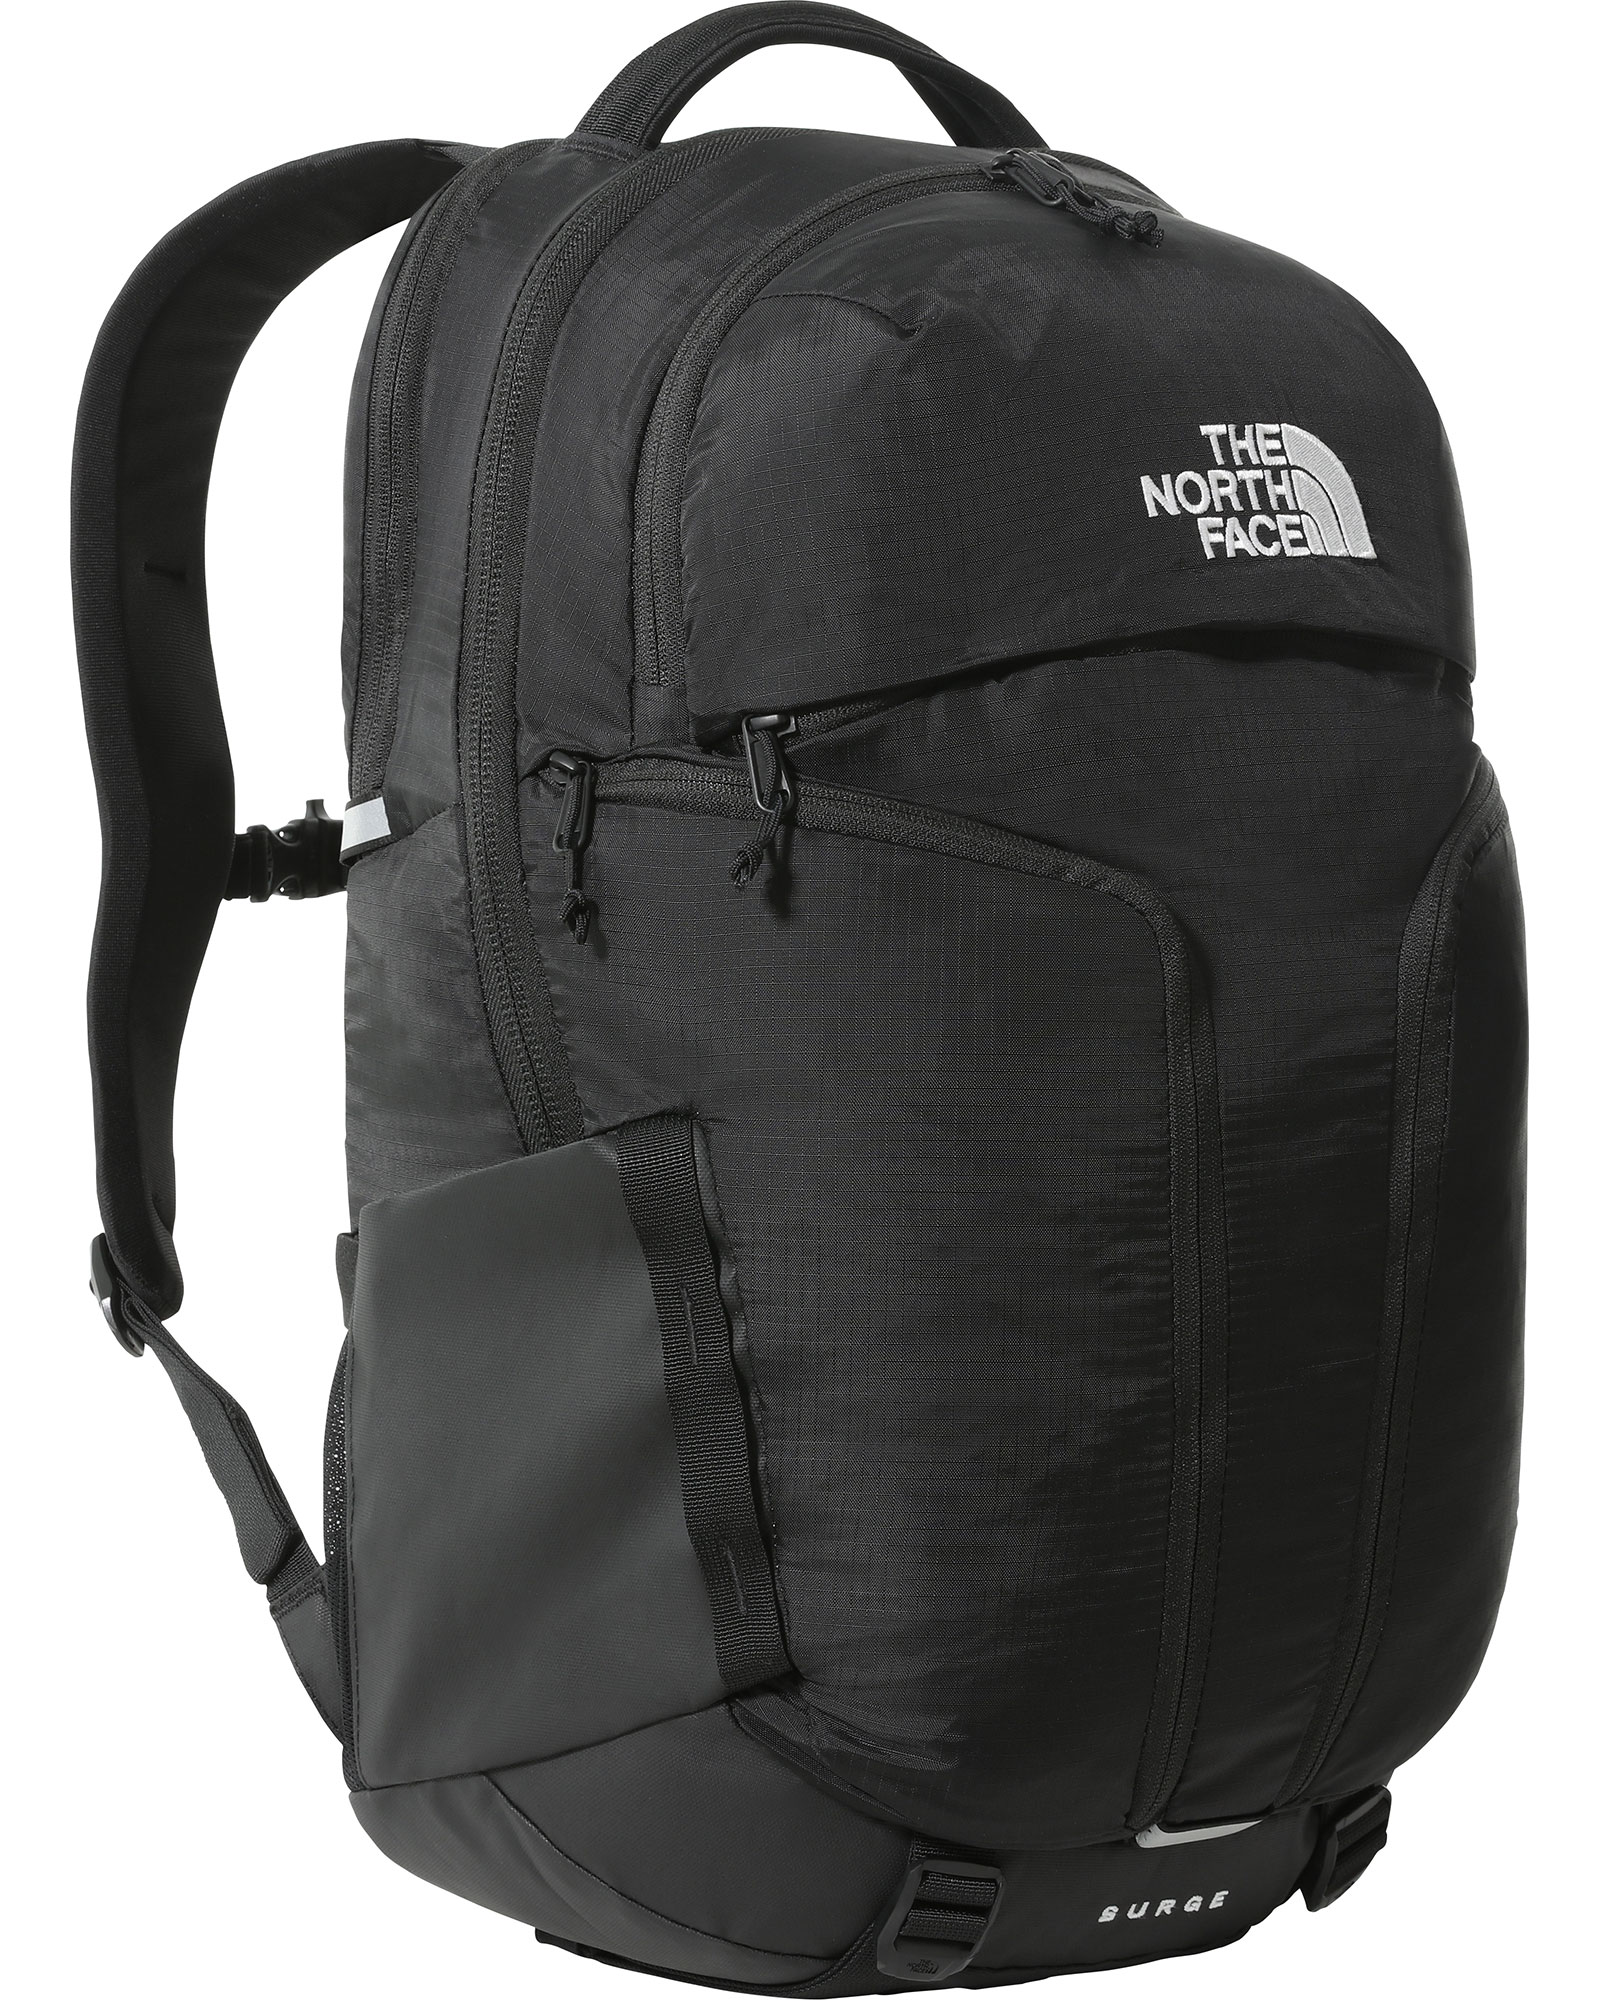 The North Face Surge Backpack - TNF Black/TNF Black